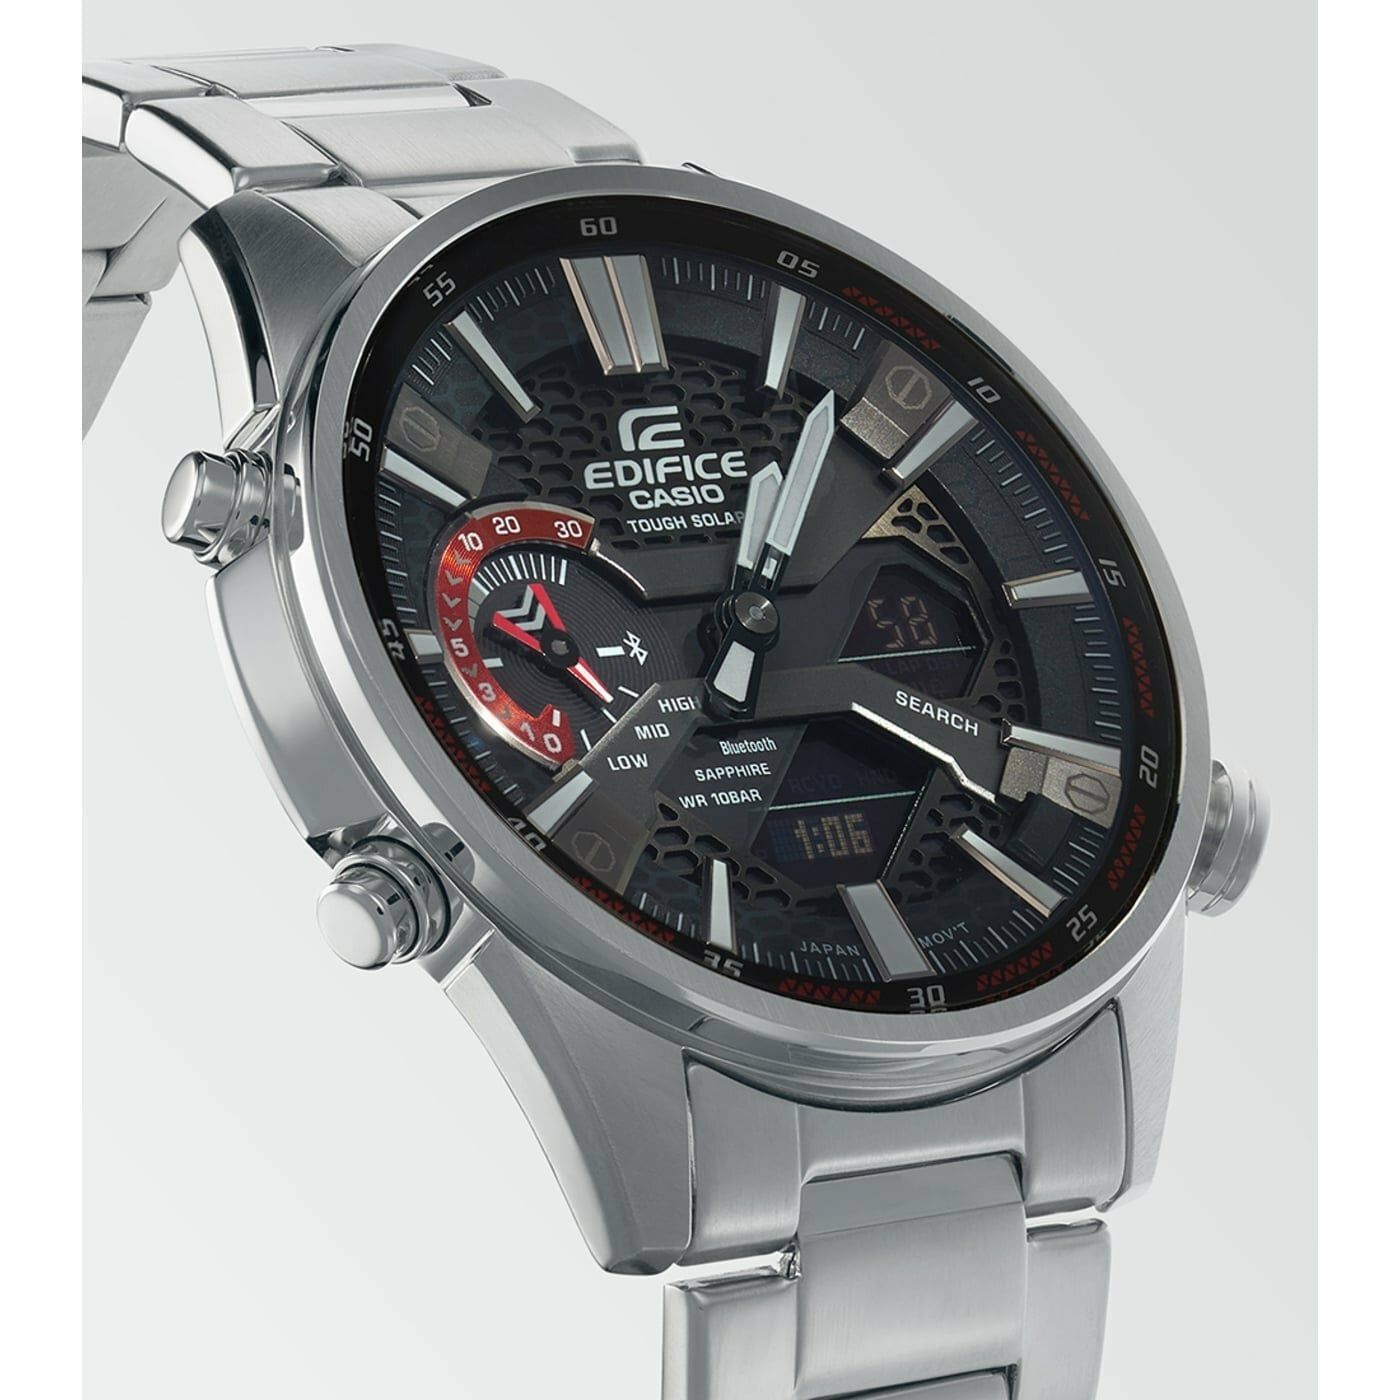 This Casio Edifice Analogue-Digital Watch for Men is the perfect timepiece to wear or to gift. It's Silver 42 mm Round case combined with the comfortable Silver Stainless steel will ensure you enjoy this stunning timepiece without any compromise. Operated by a high quality Quartz movement and water resistant to 10 bars, your watch will keep ticking. This sporty and fashionable watch gives you a unique feeling in every outfit! -The watch has a Calendar function: Day-Date, Bluetooth, Solar Powered,Stop Watch, Worldtime, Countdown High quality 21 cm length and 21 mm width Silver Stainless steel strap with a Fold over with push button clasp Case diameter: 42 mm,case thickness: 9 mm, case colour: Silver and dial colour: Black